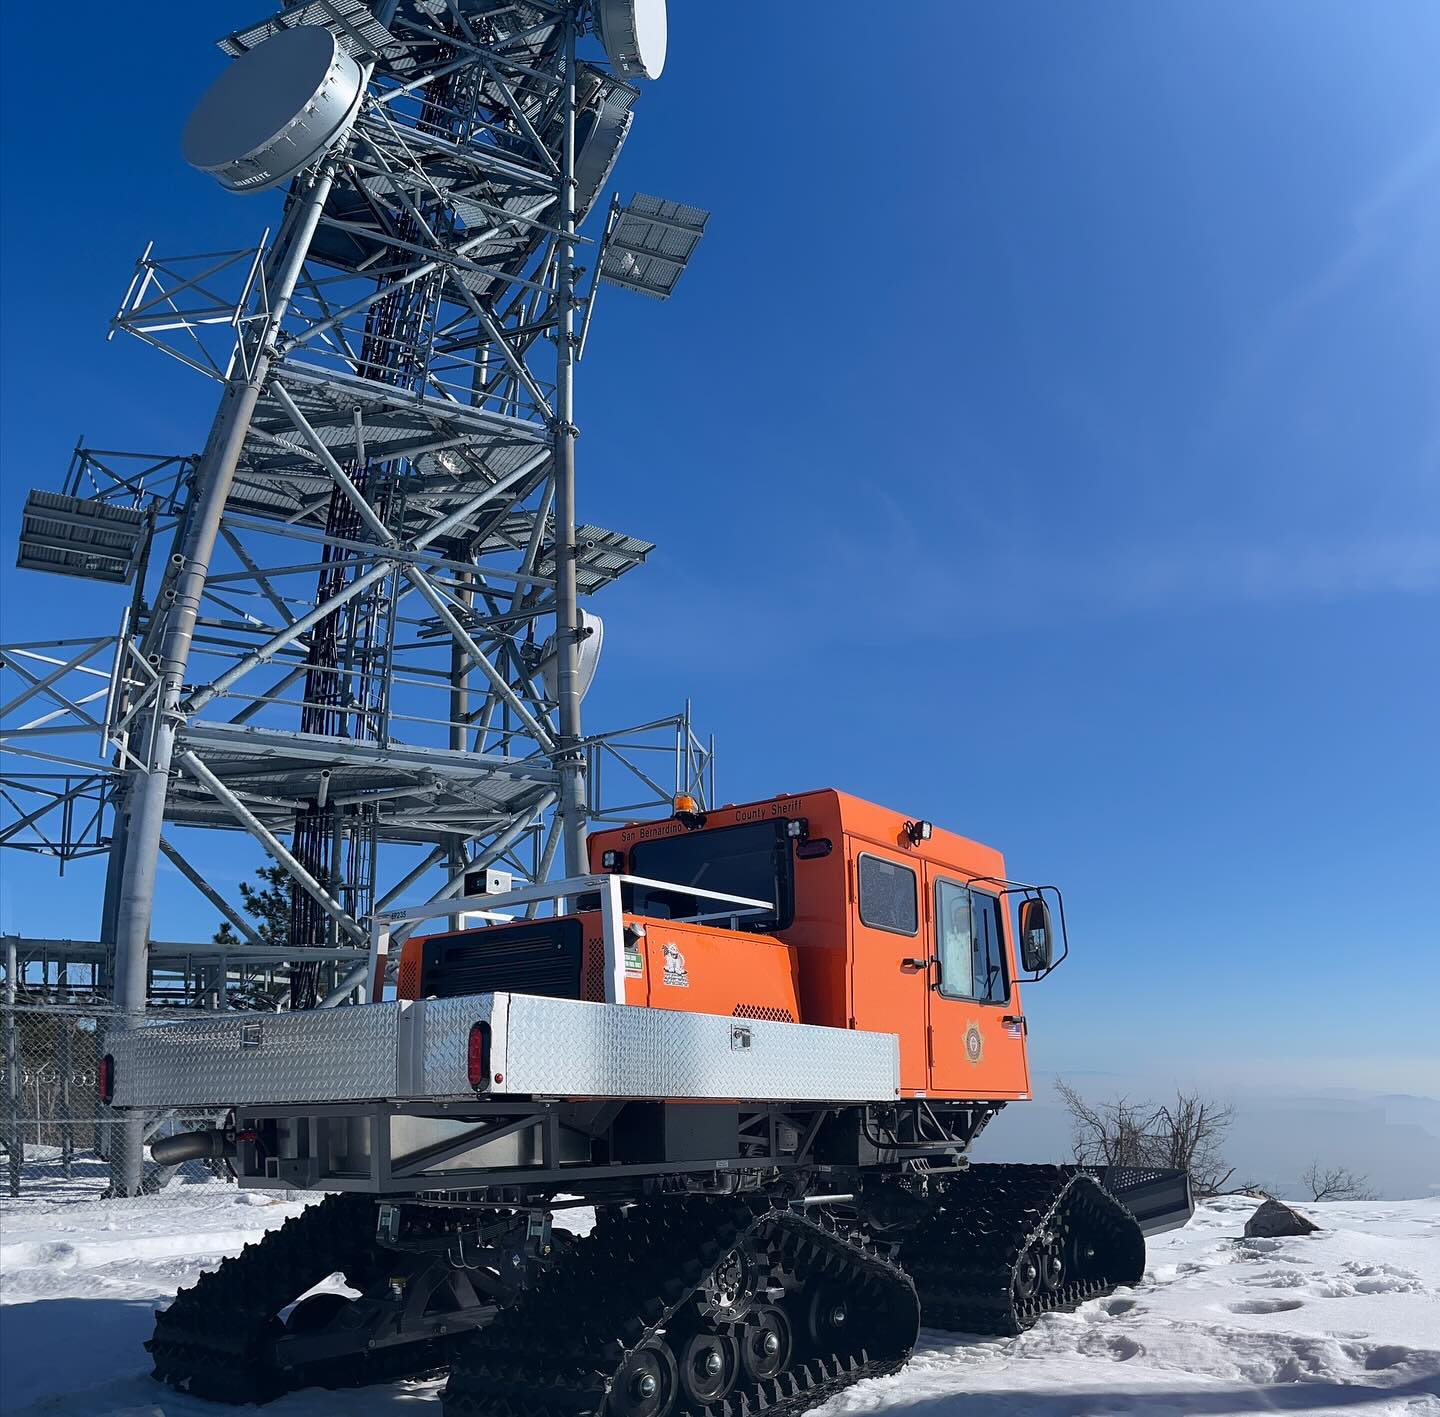 A new Sno-Cat parked next to a communications tower with snow on the ground.